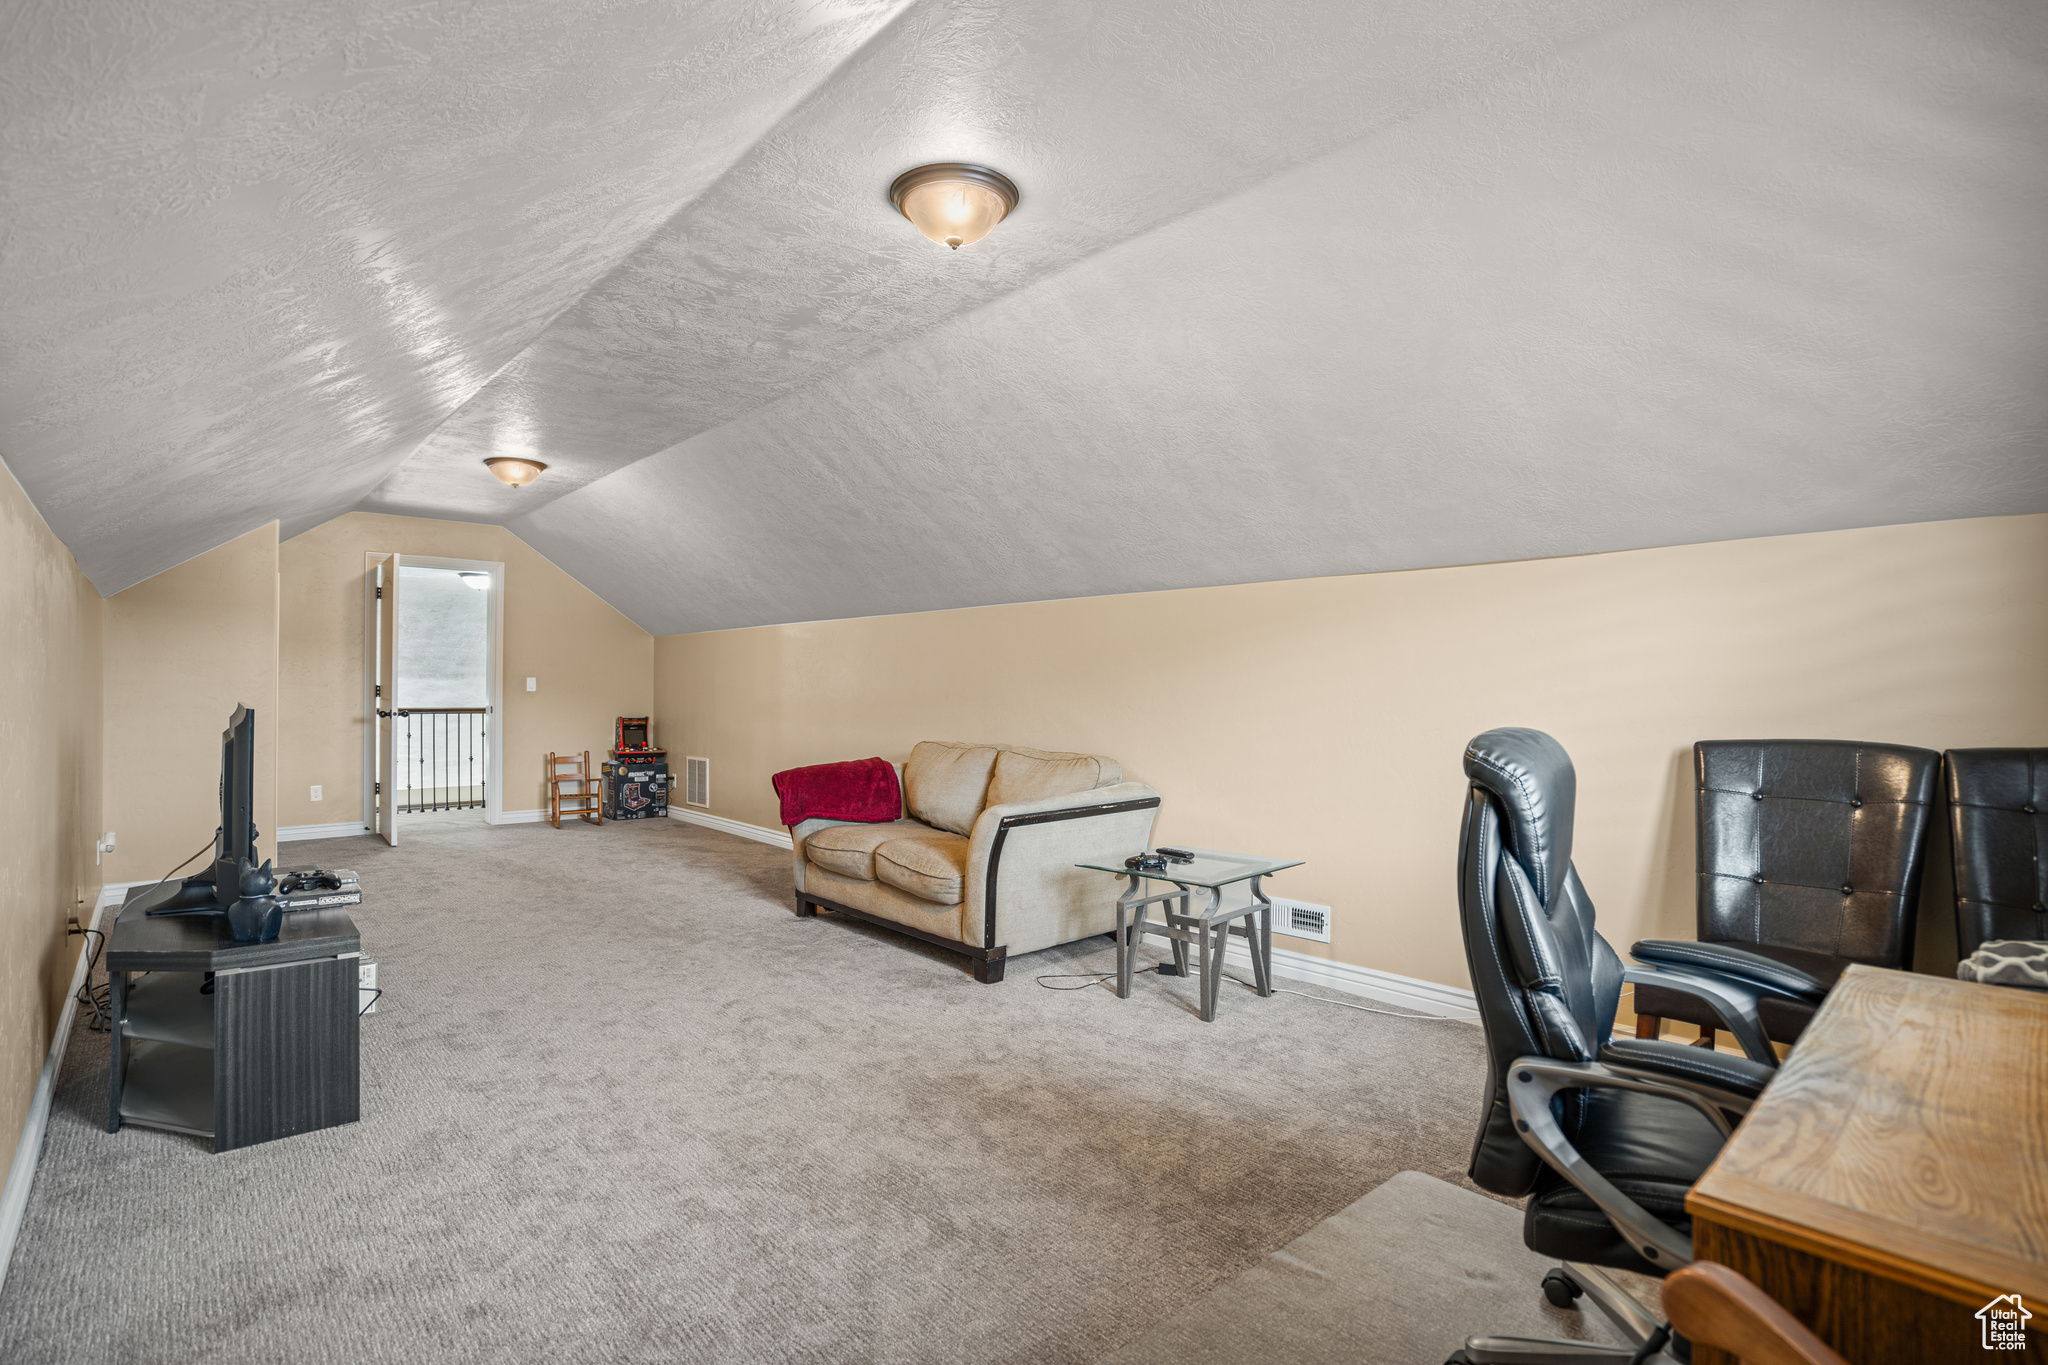 Office with vaulted ceiling, carpet flooring, and a textured ceiling